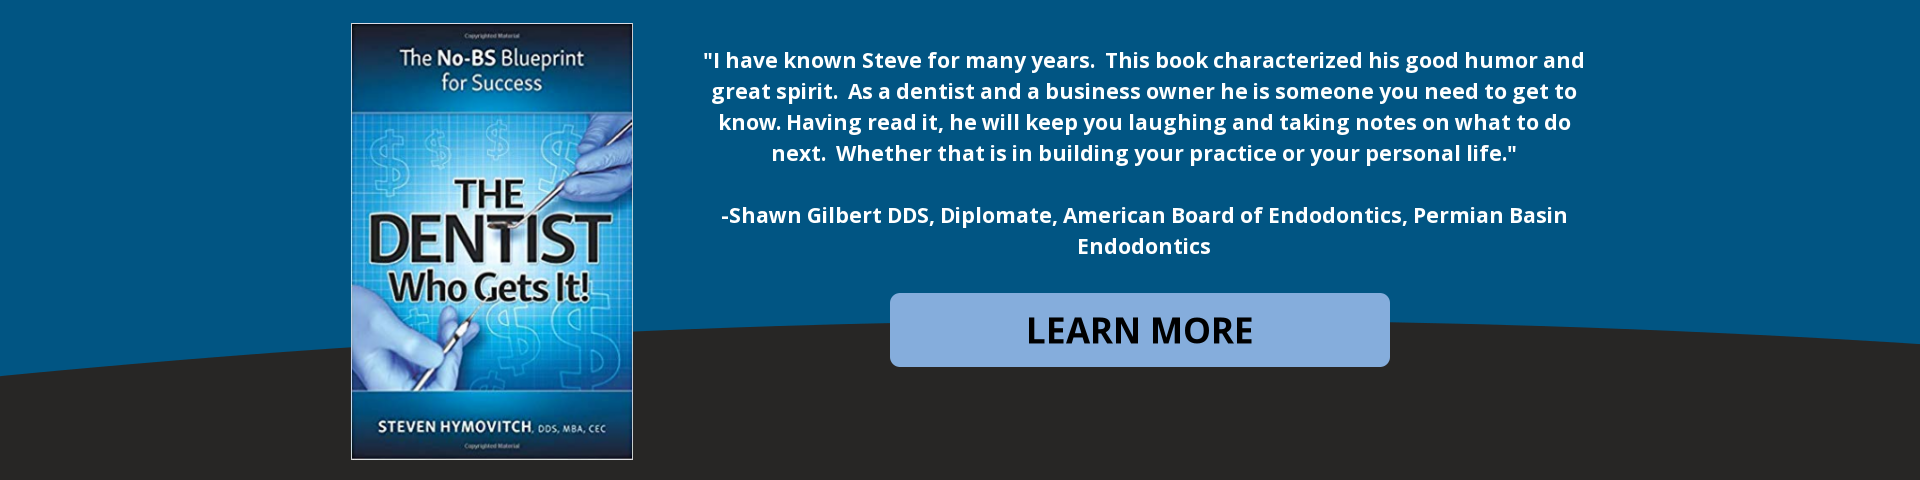 The Dentist Who Gets It! by Dr. Steven Hymovitch